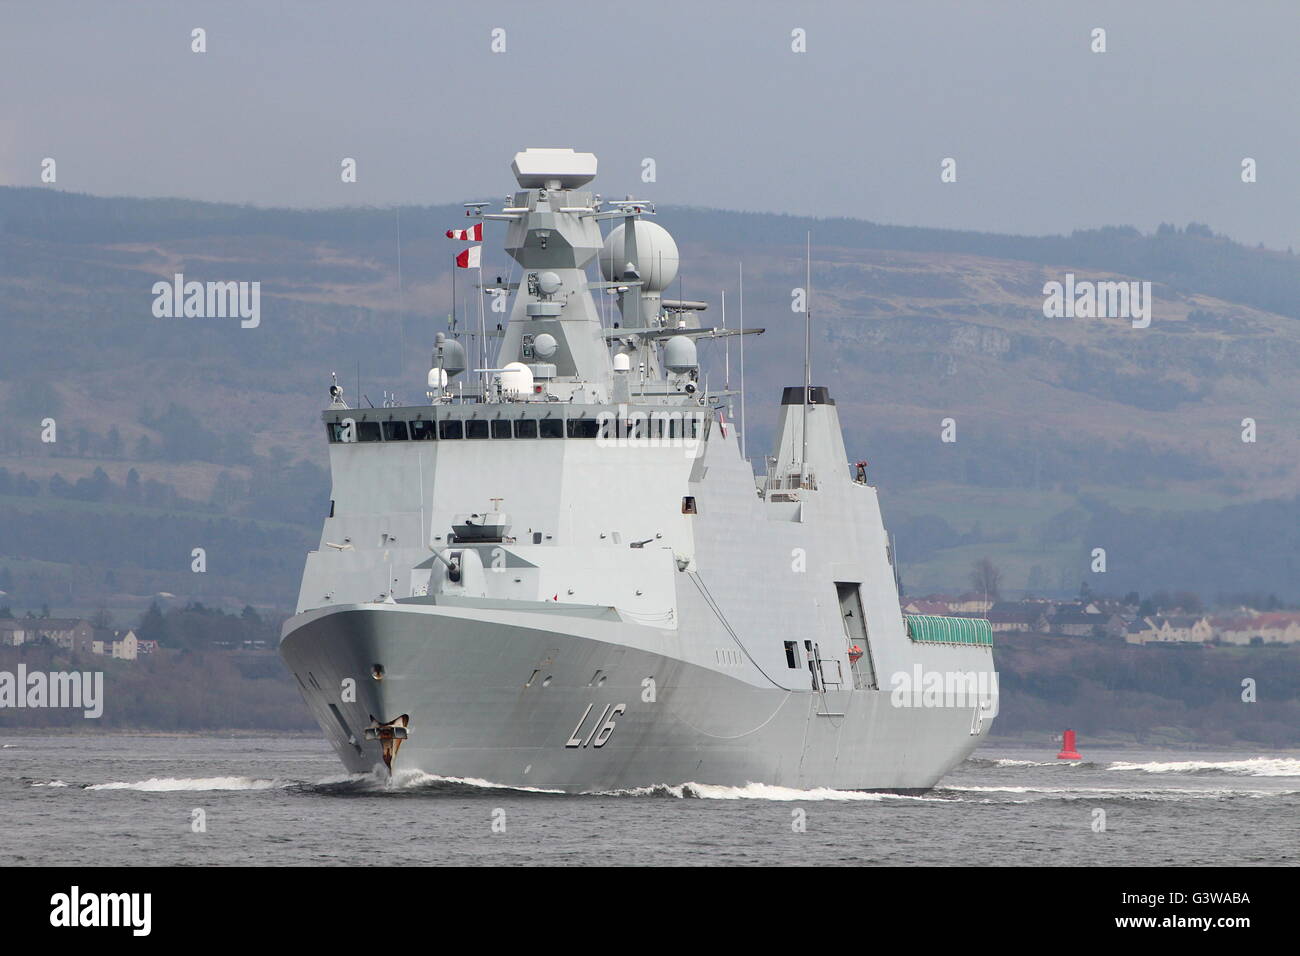 KDM Absalon (L16), a command and support vessel of the Royal Danish Navy, passes Port Glasgow at the start of Joint Warrior 16-1 Stock Photo